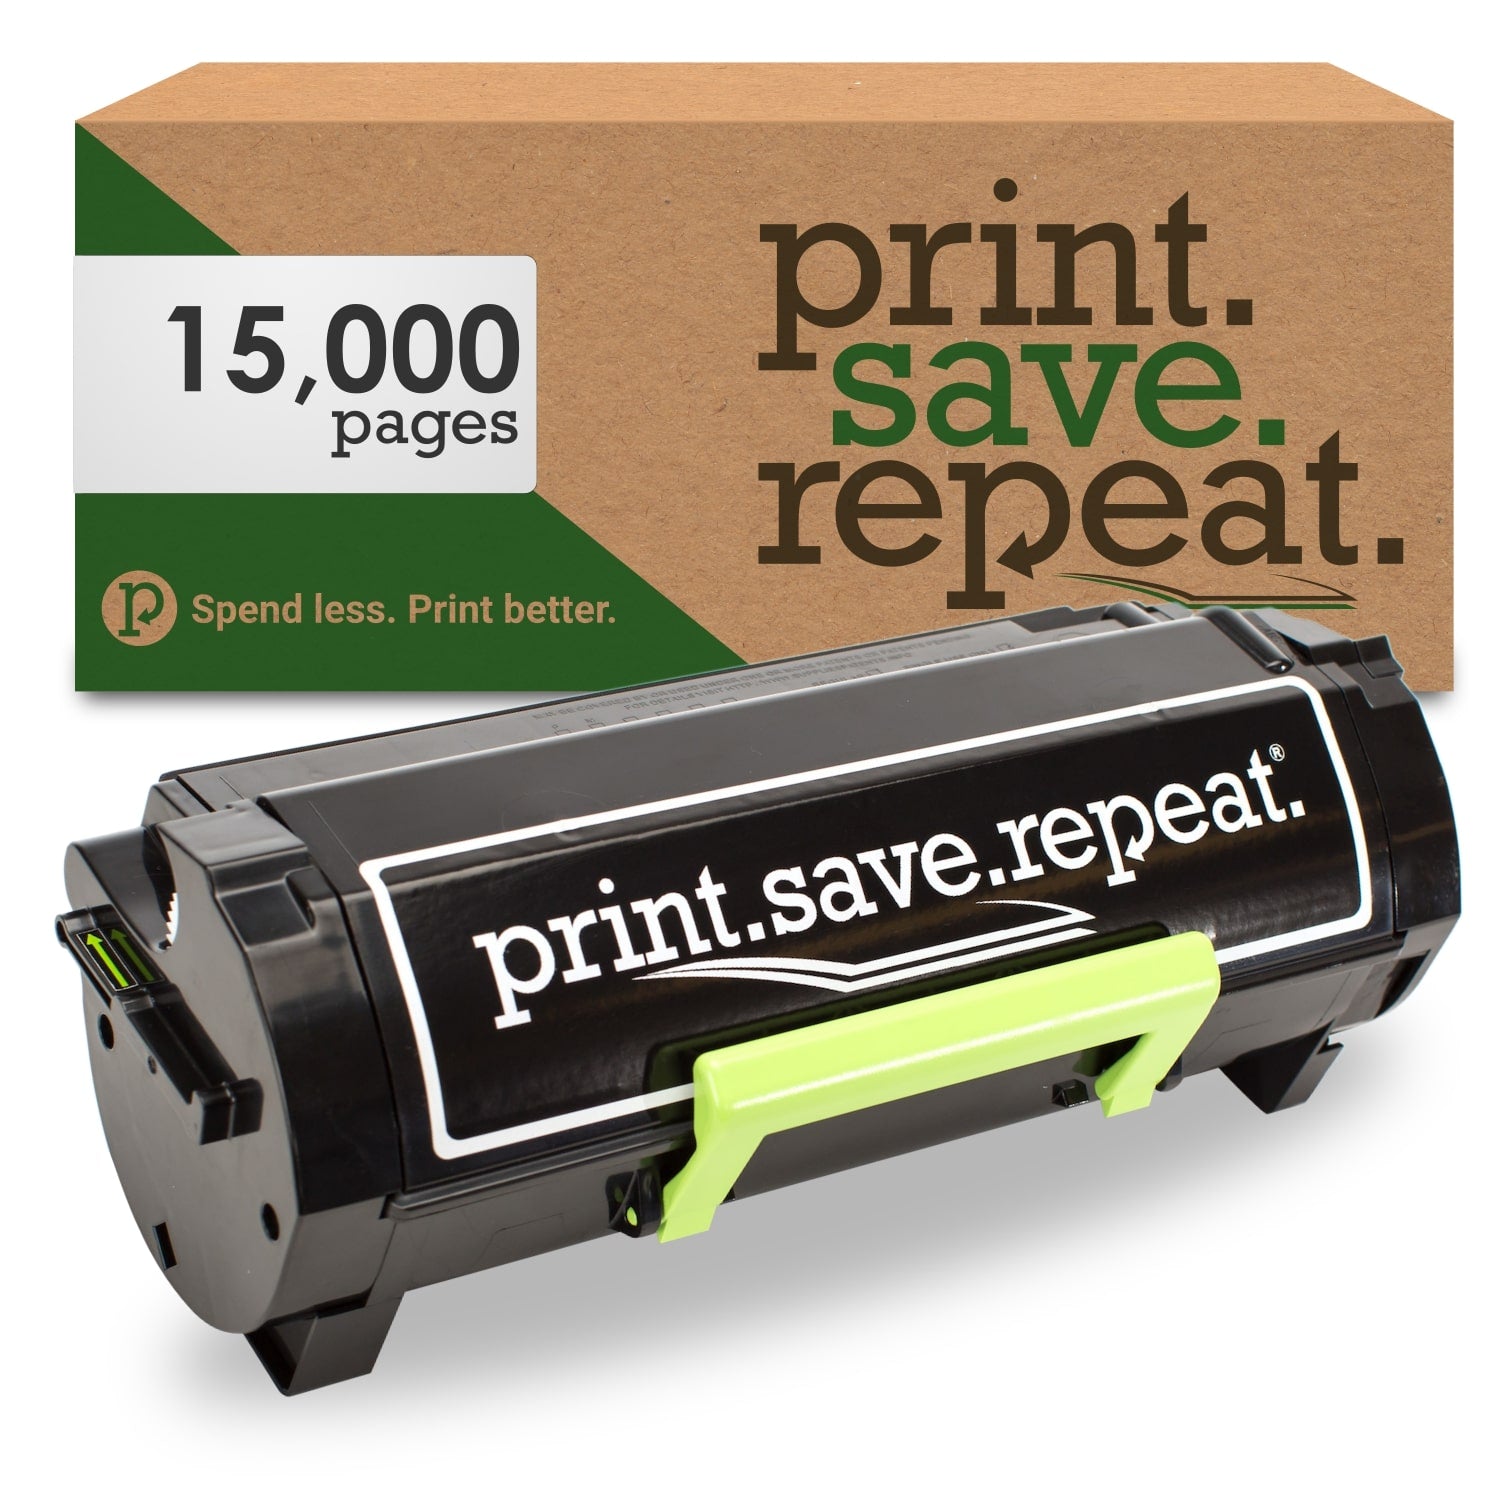 Print.Save.Repeat. Lexmark 56F1H00 High Yield Remanufactured Toner Cartridge for MS321, MS421, MS521, MS621, MS622, MX321, MX421, MX521, MX522, MX622 [15,000 Pages]